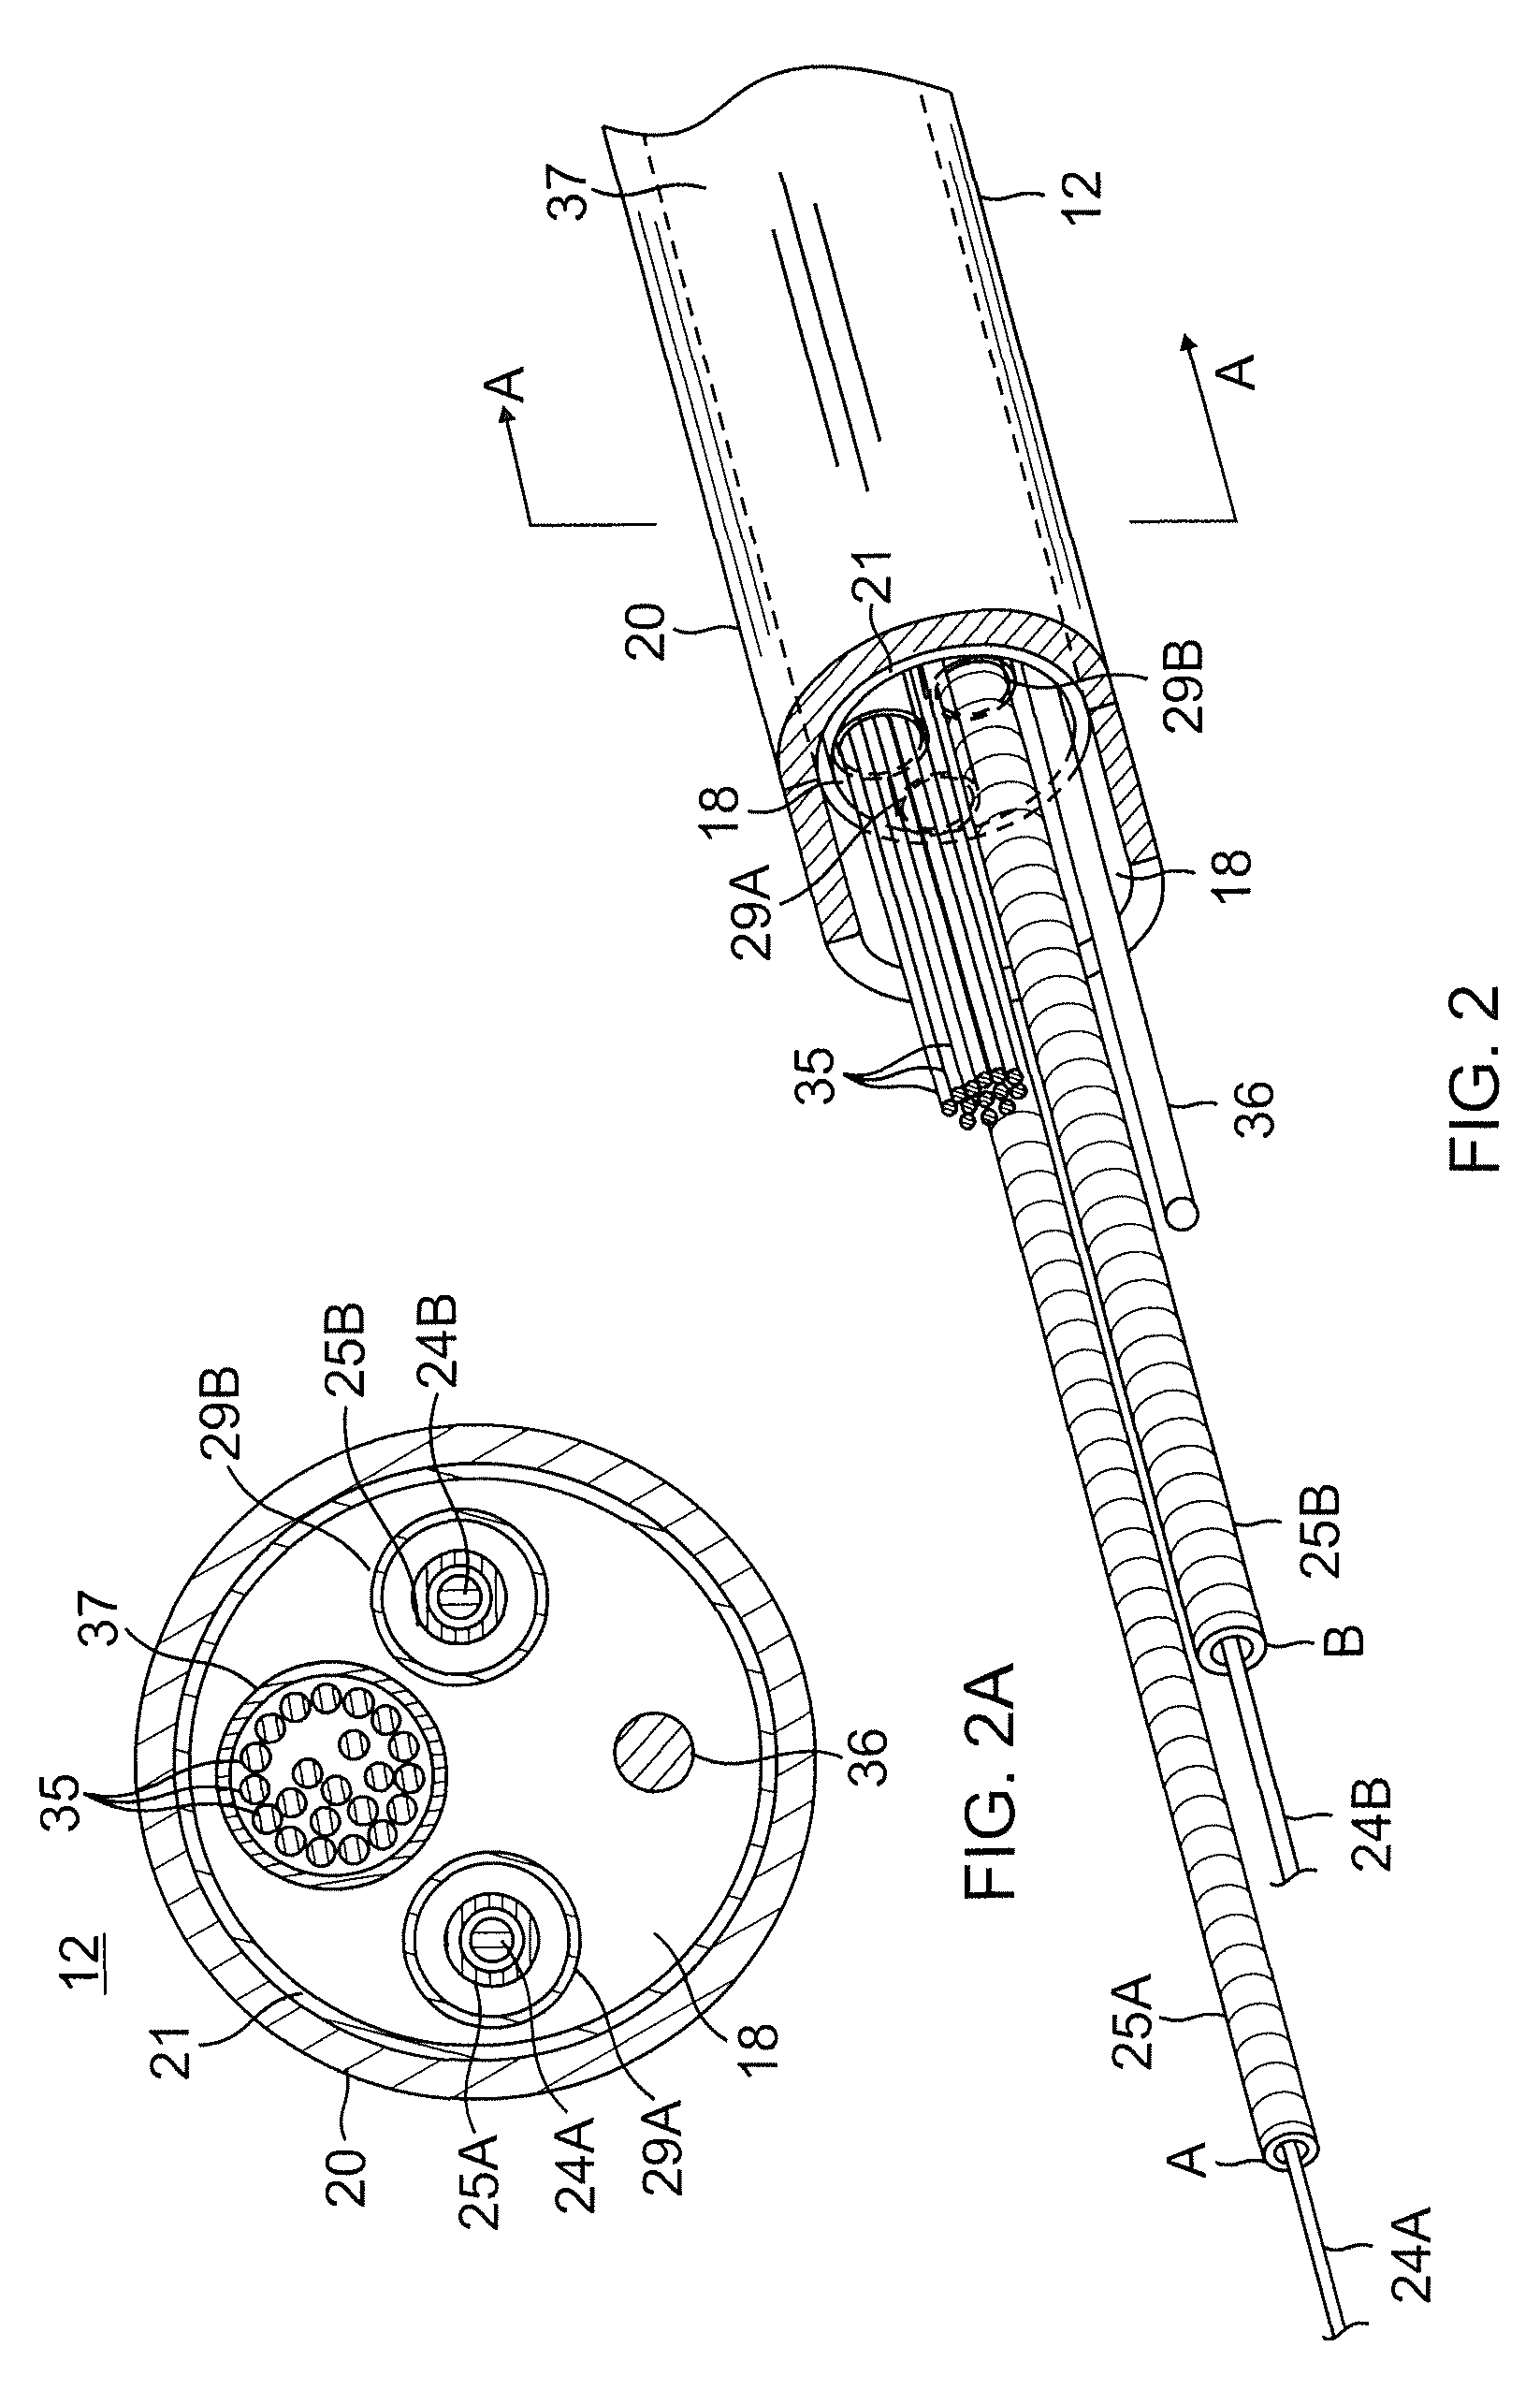 Double loop lasso with single puller wire for bi-directional actuation